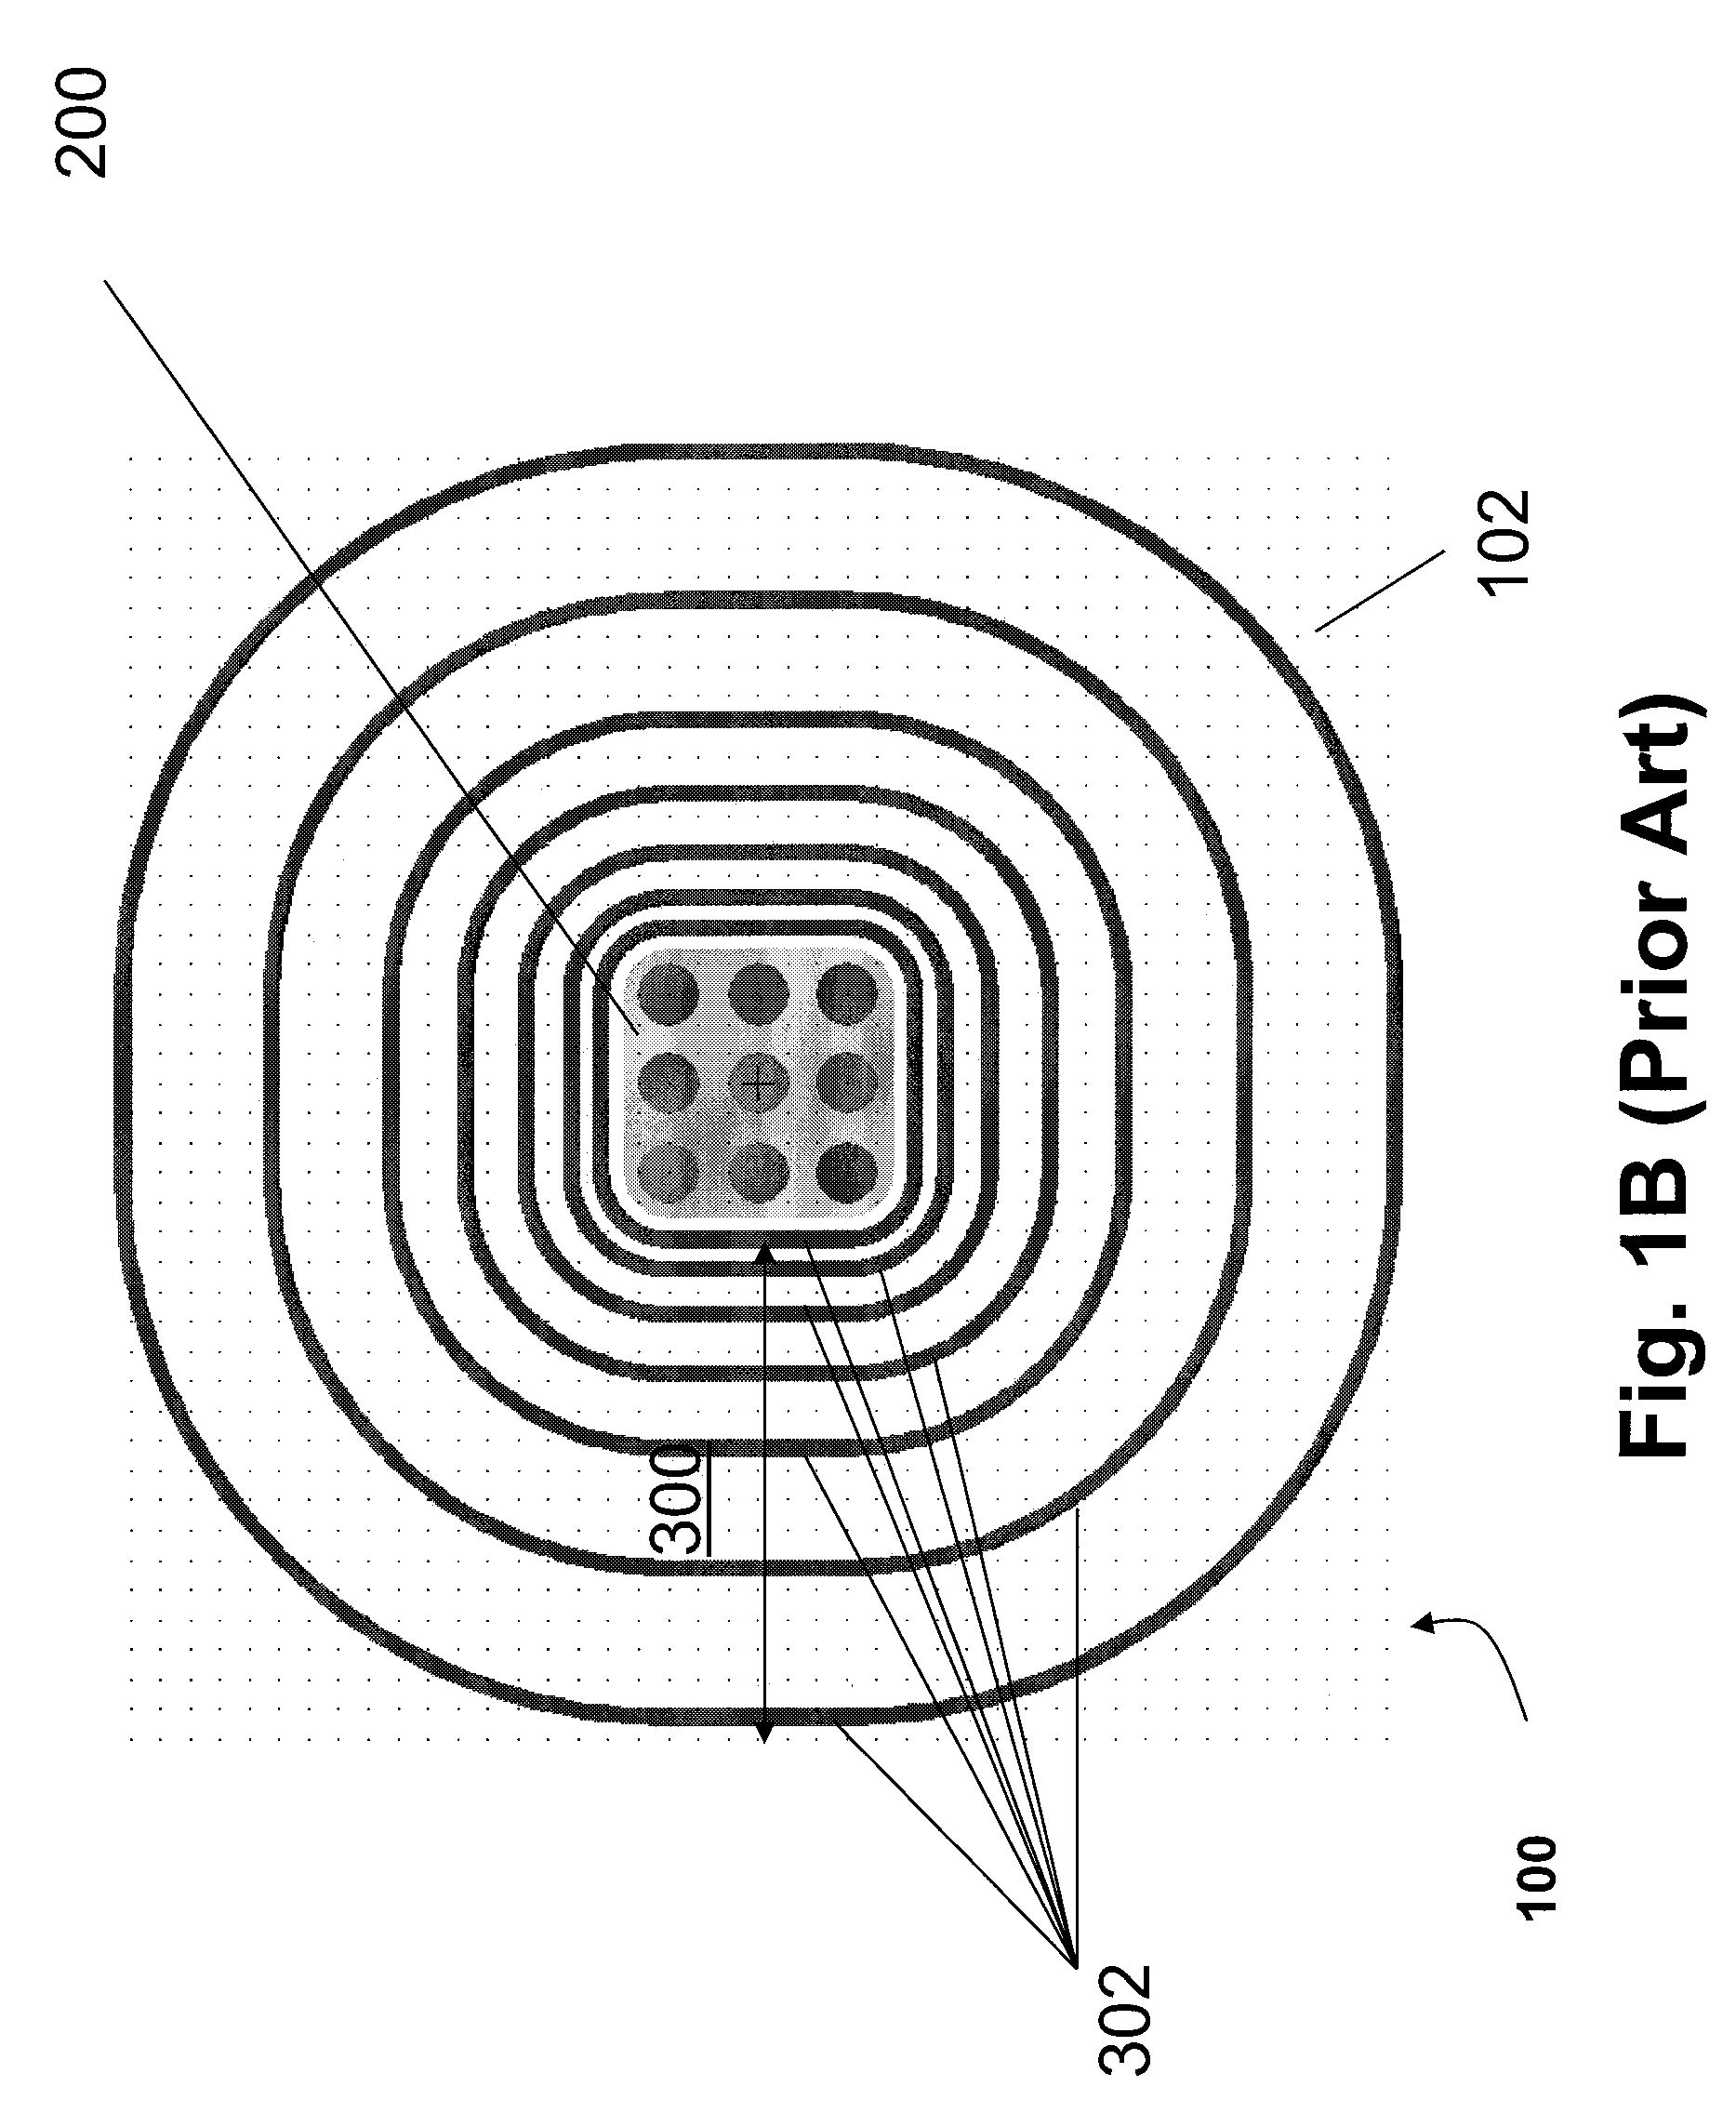 Superjunction device having a dielectric termination and methods for manufacturing the device